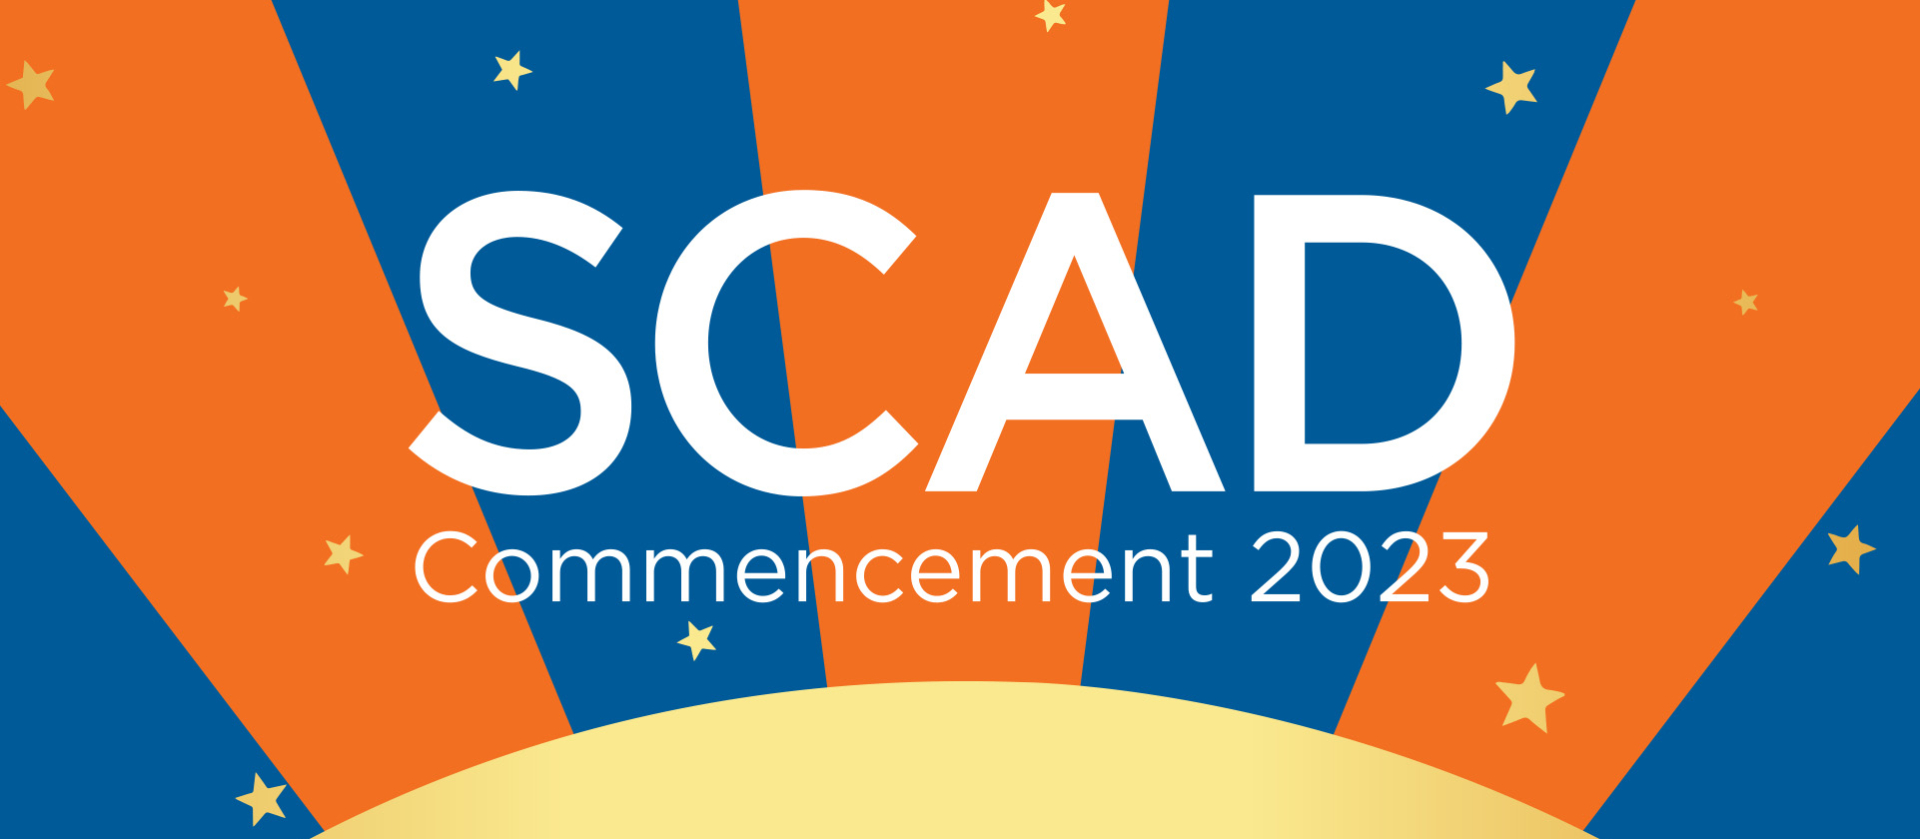 Commencement UGC form SCAD